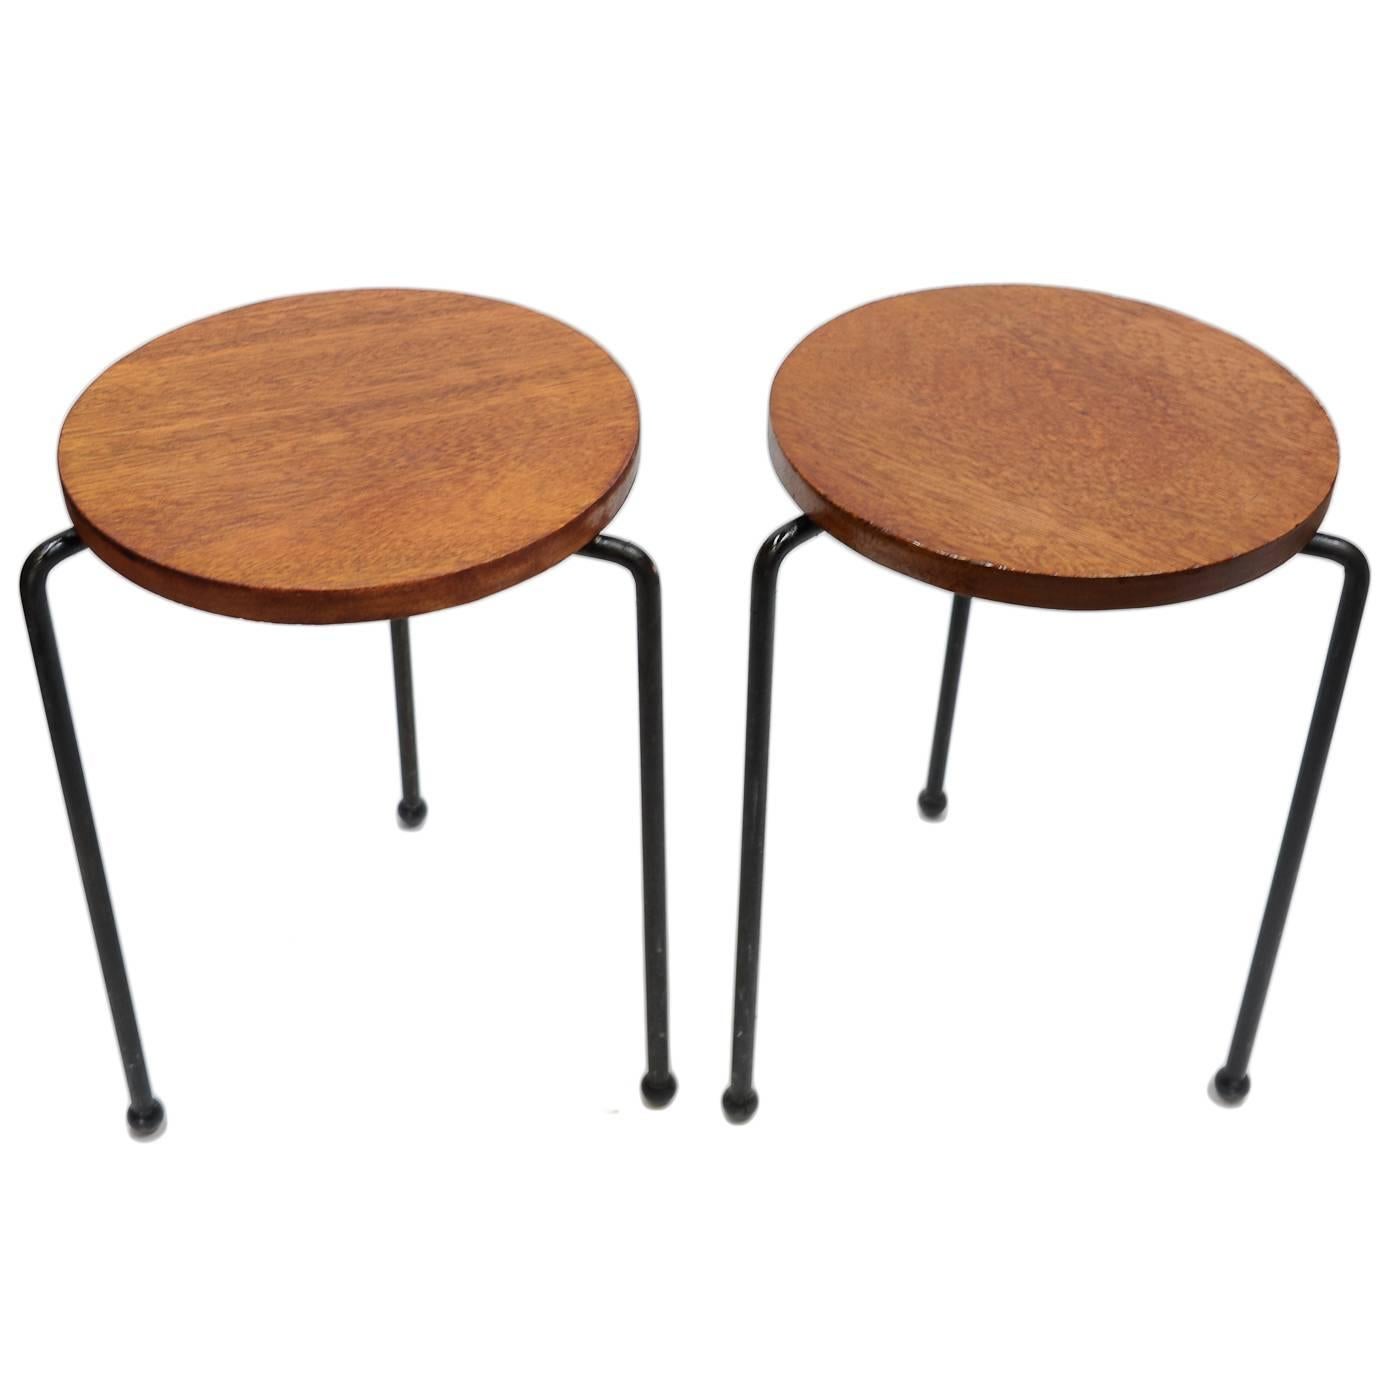 Pair of Luther Conover Stools with the Original Ball Feet from Sausalito CA